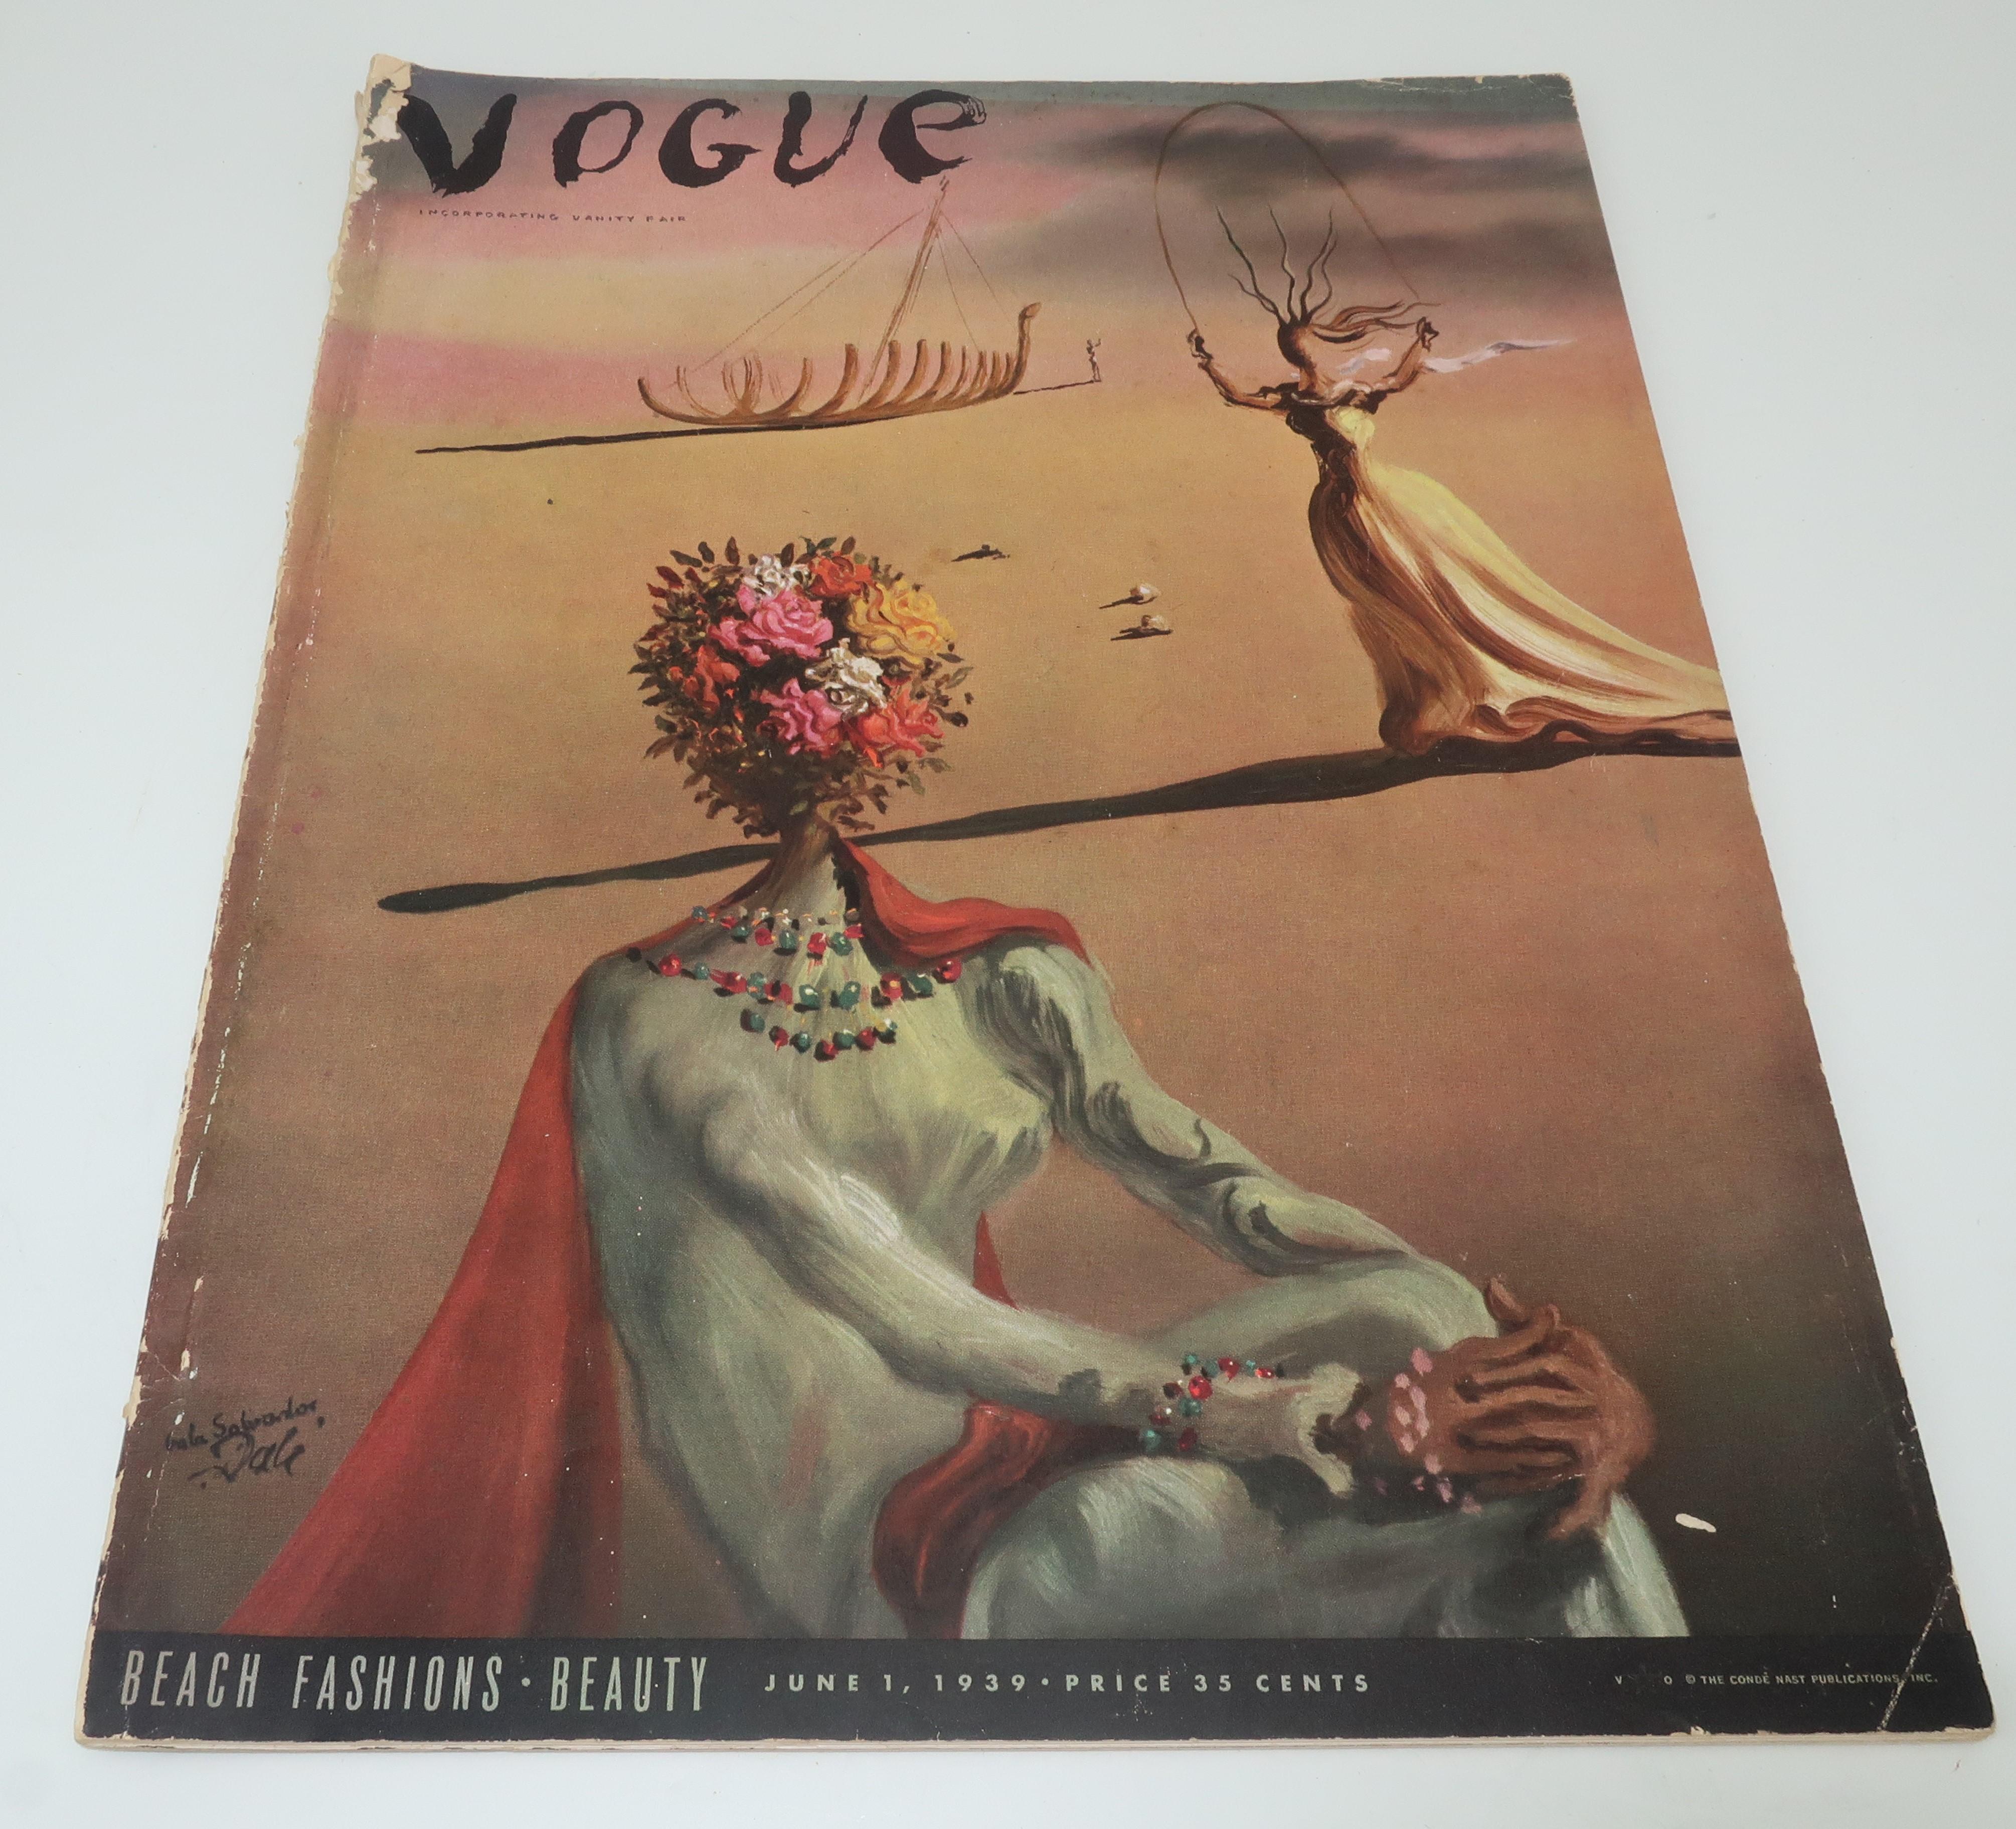 Dali does Vogue!  This June 1939 issue of Vogue magazine features the surrealist masterwork of Salvador Dali not only gracing the richly hued cover but also in contributions throughout the magazine.  Mr. Dali was no stranger to fashion always